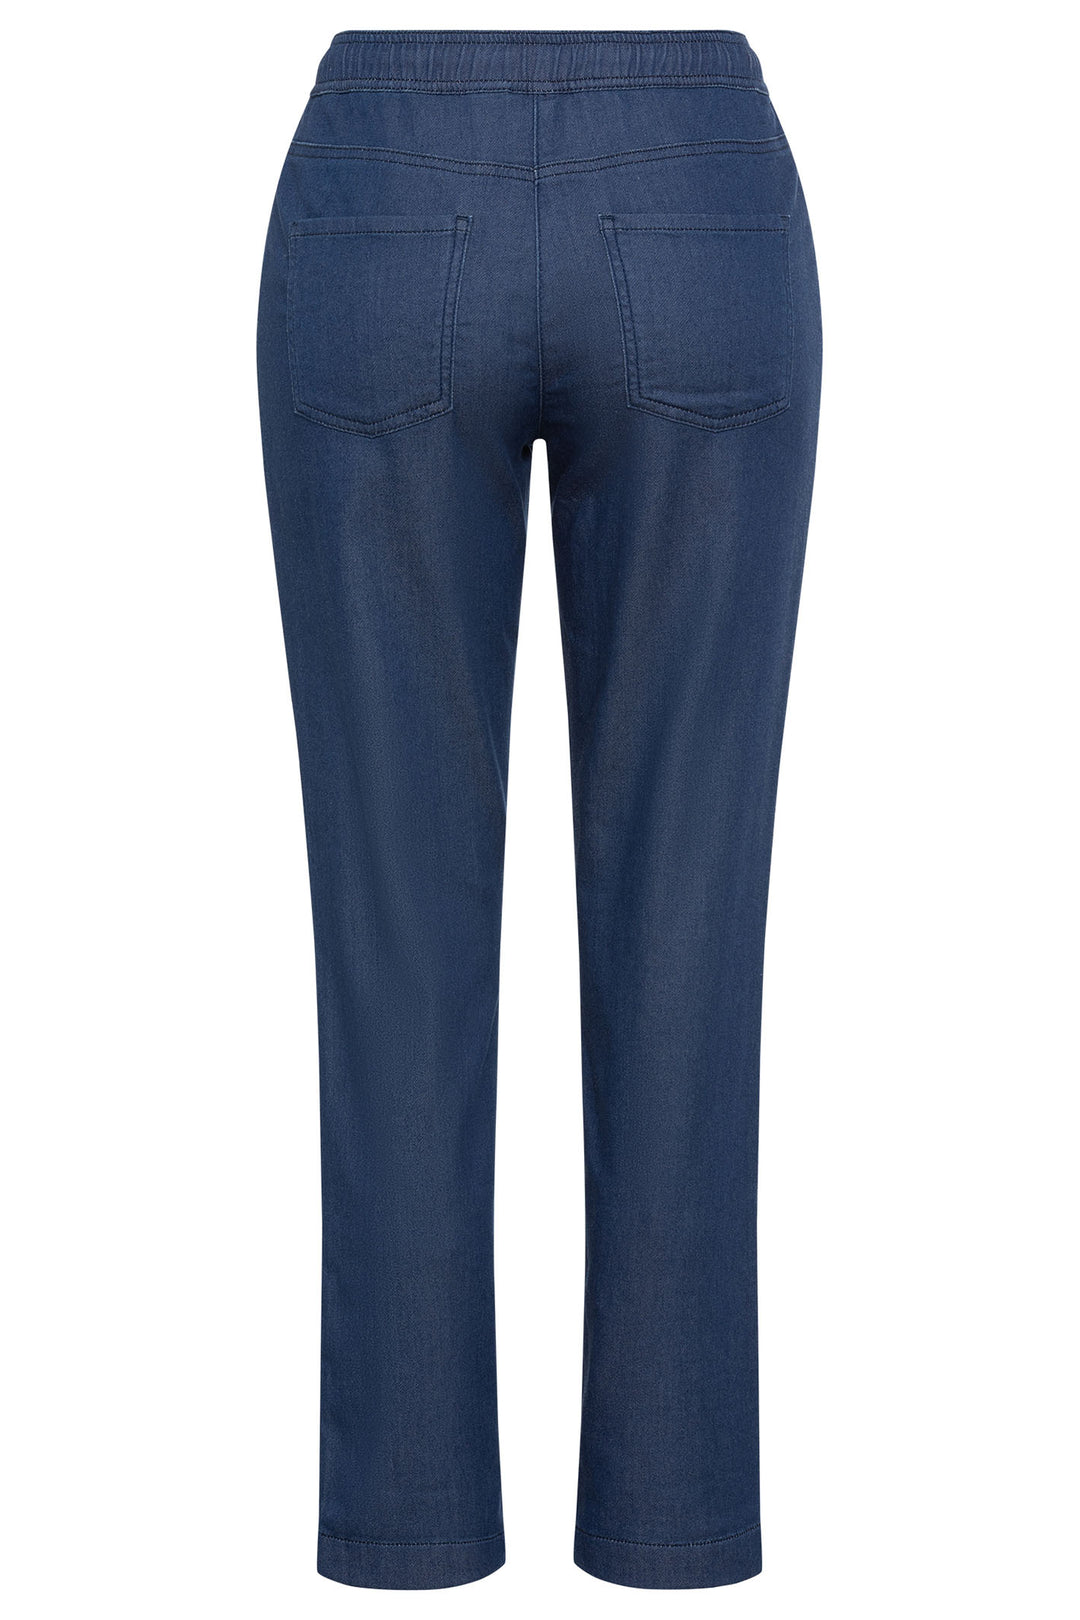 Olsen 14002202 Blue Denim Cropped Pull-On Trousers - Experience Boutique